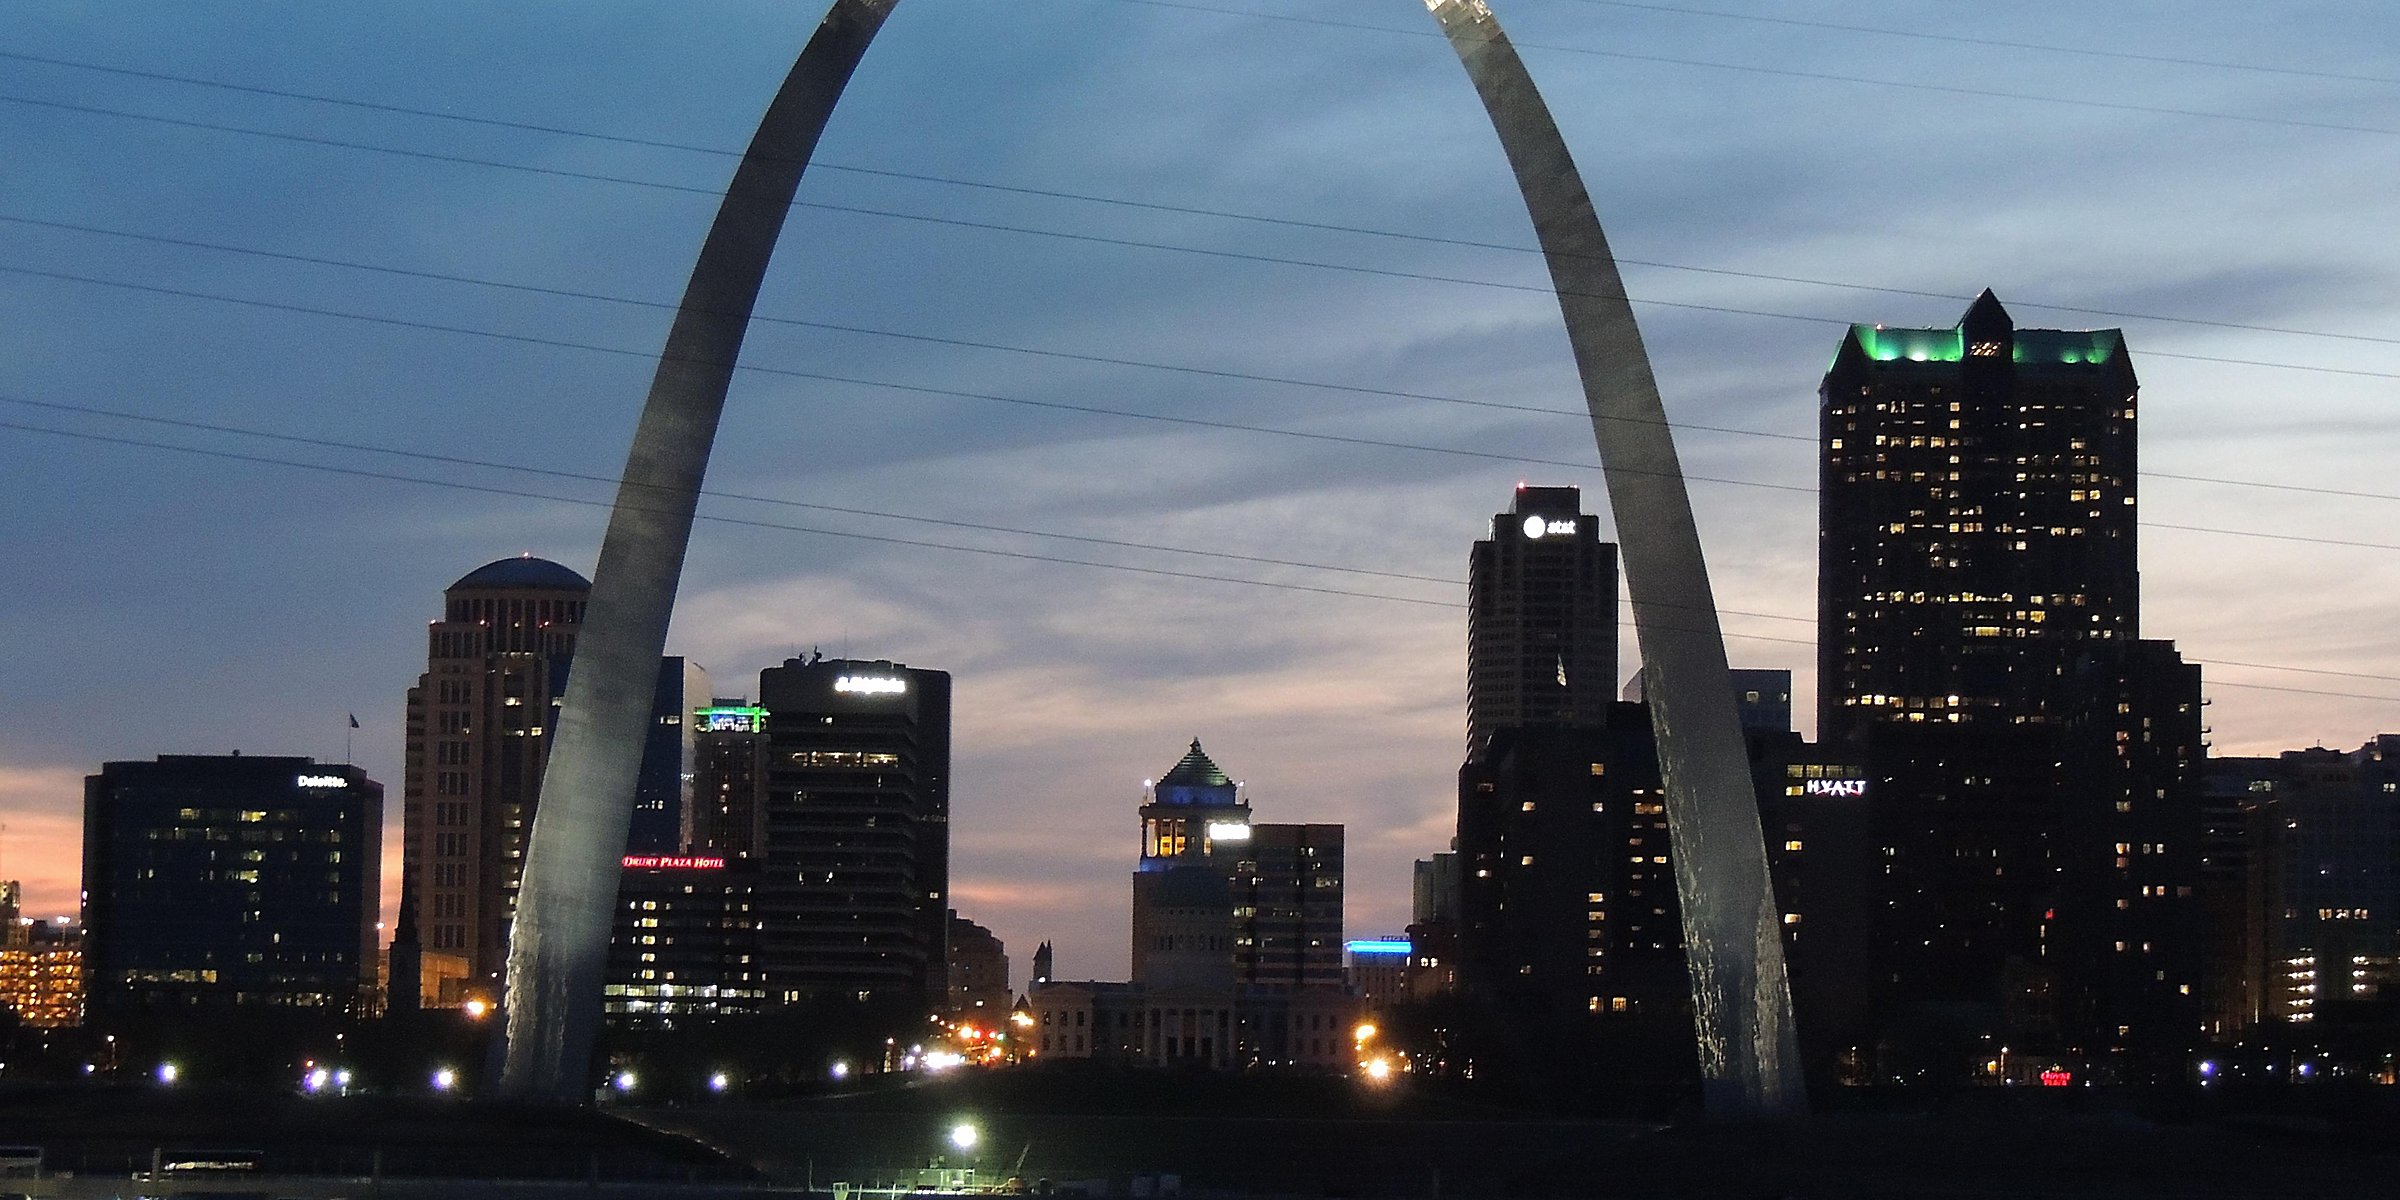 10 Romantic Things To Do In StLouis, Missouri - Updated - Trip101